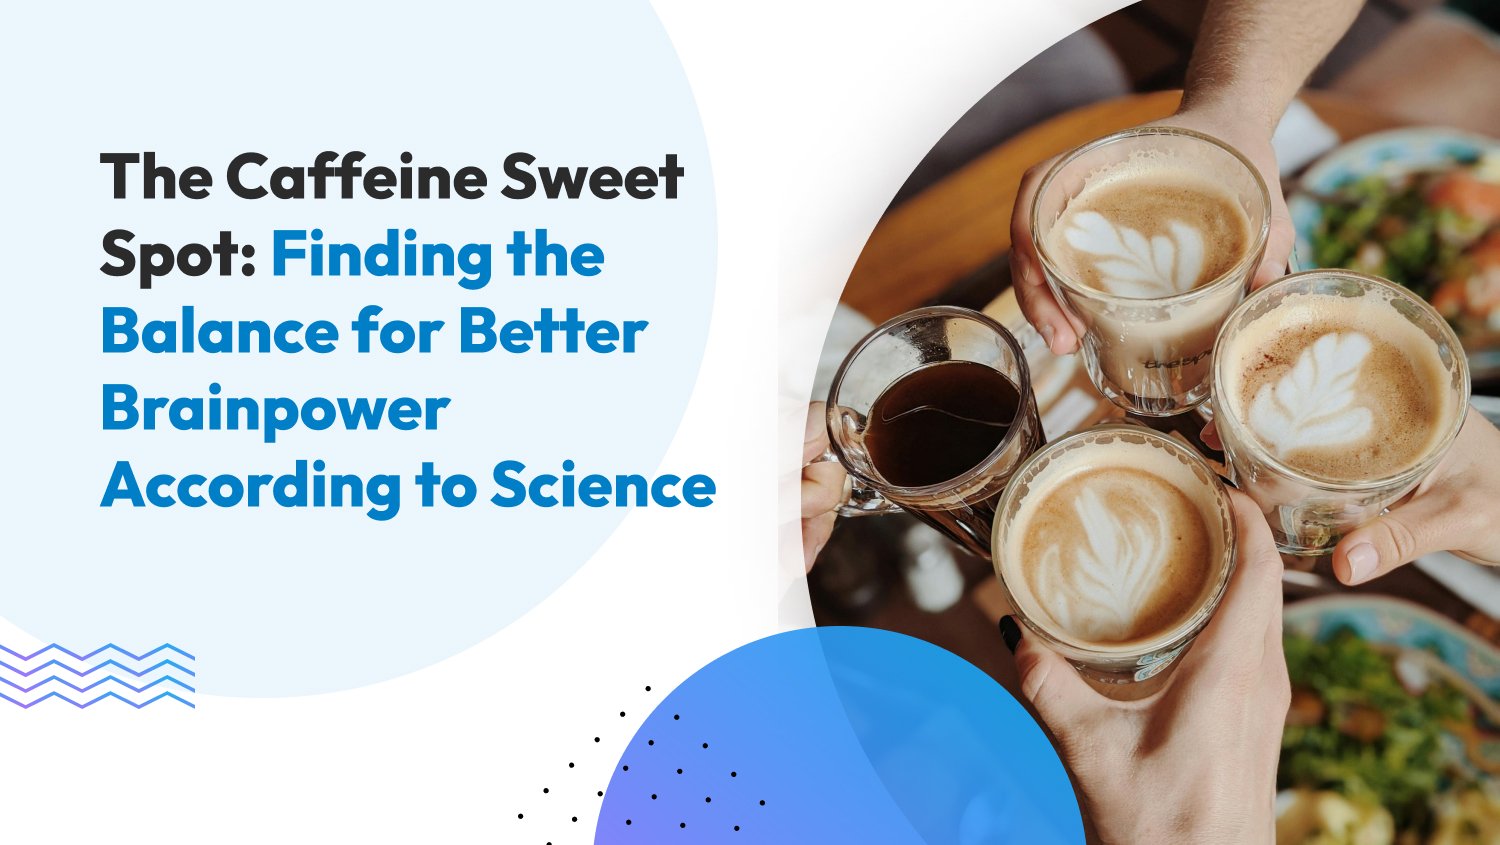 The Caffeine Sweet Spot: Finding the Balance for Better Brainpower According to Science